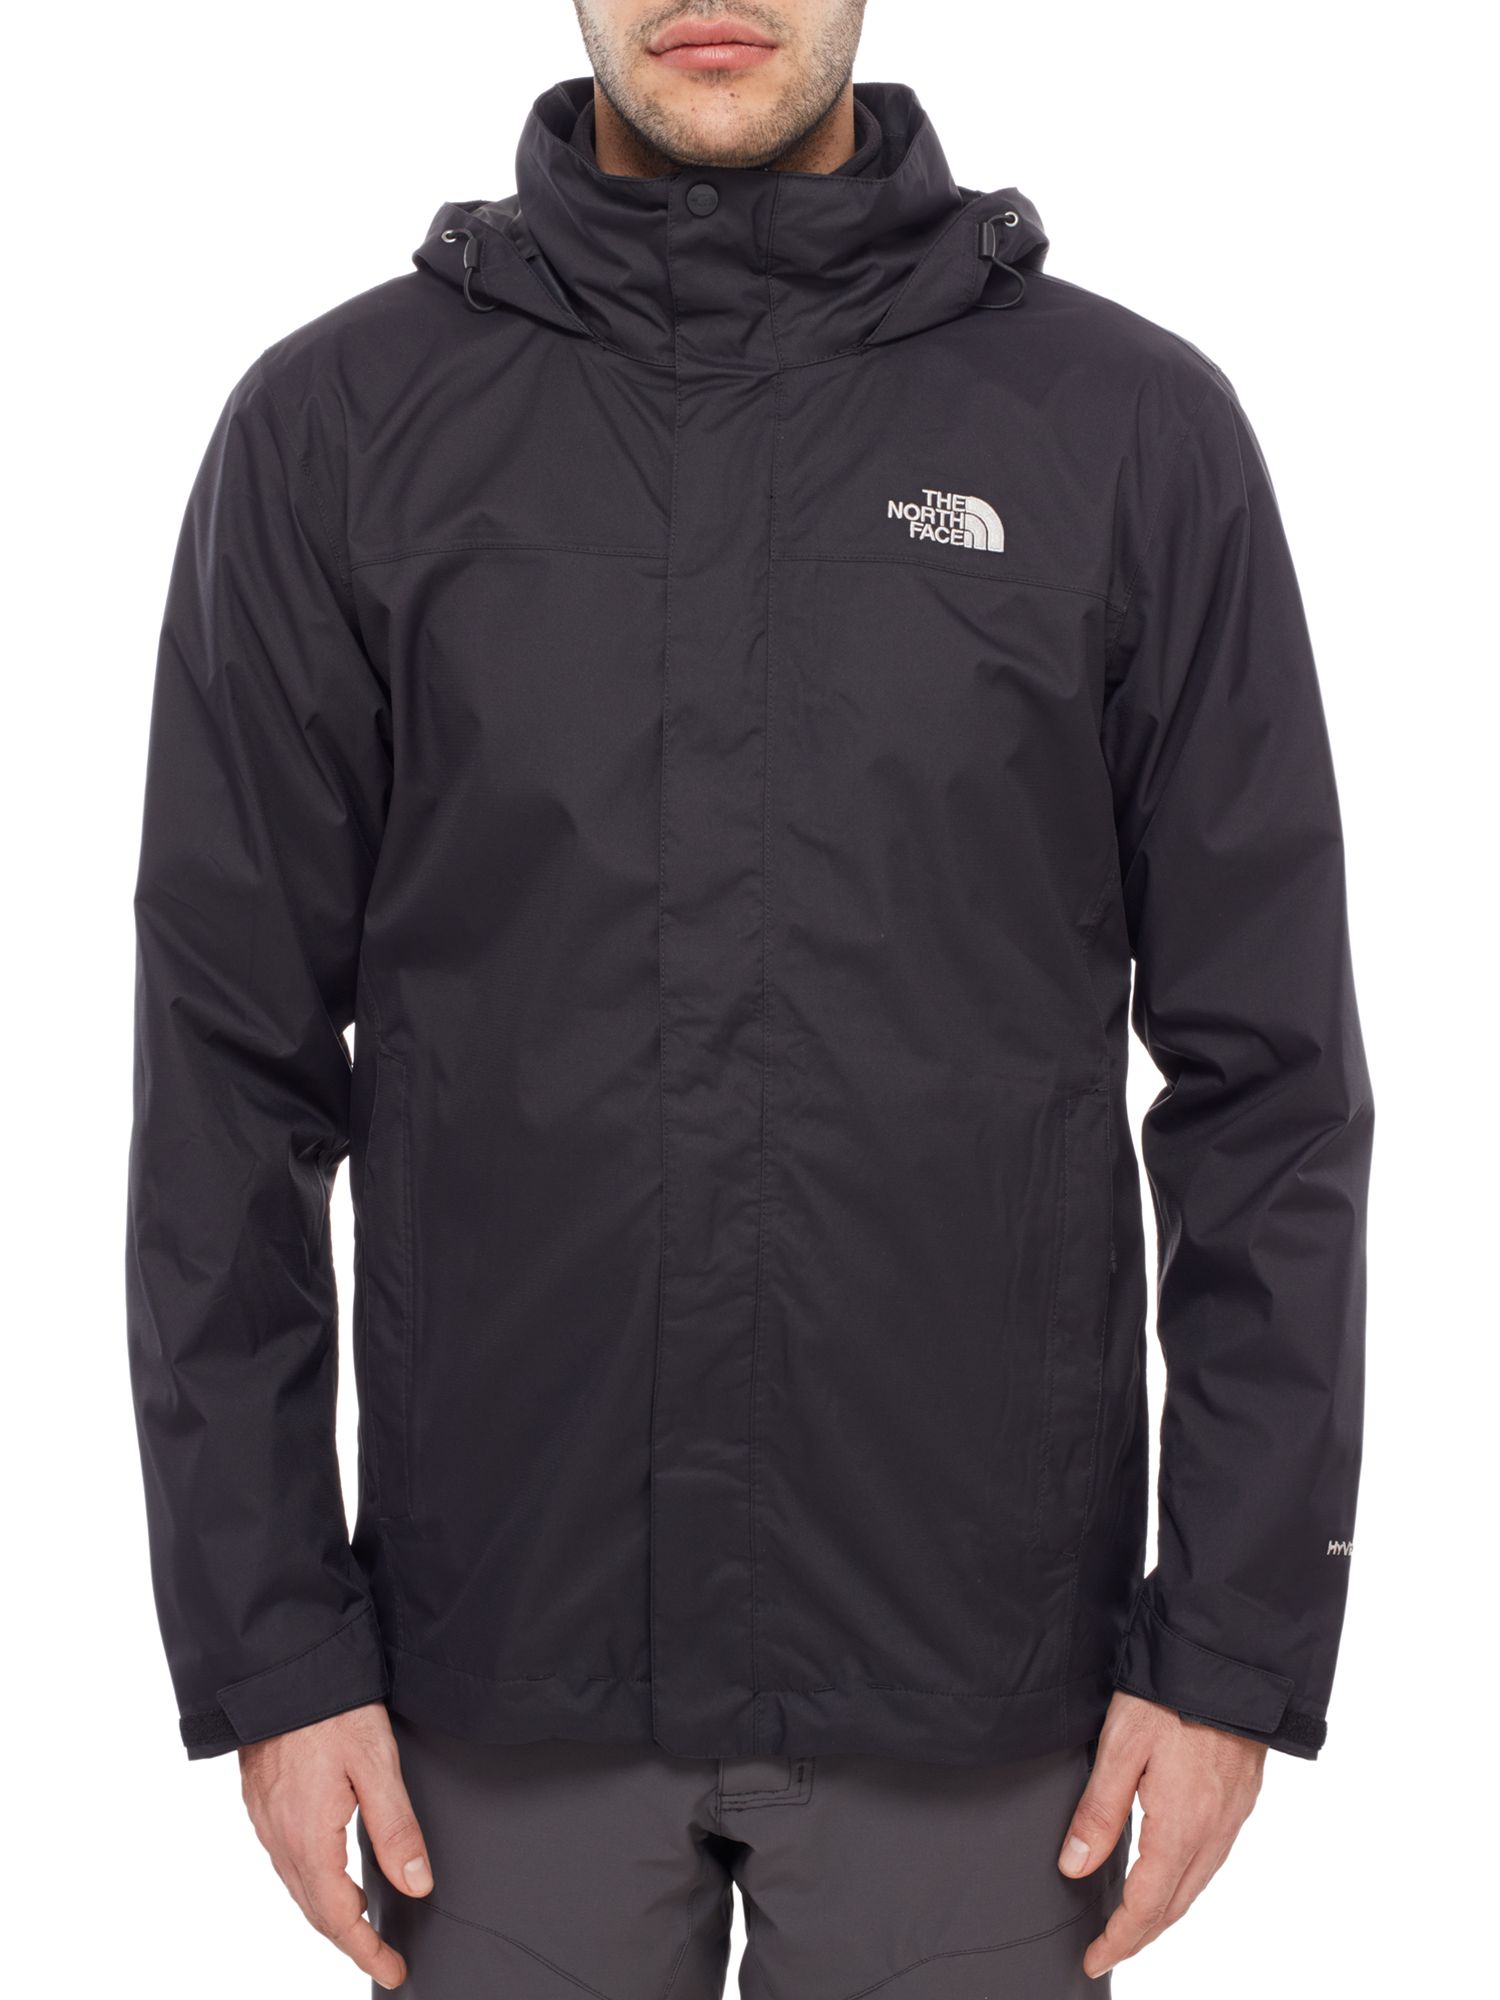 north face 3 in 1 jacket